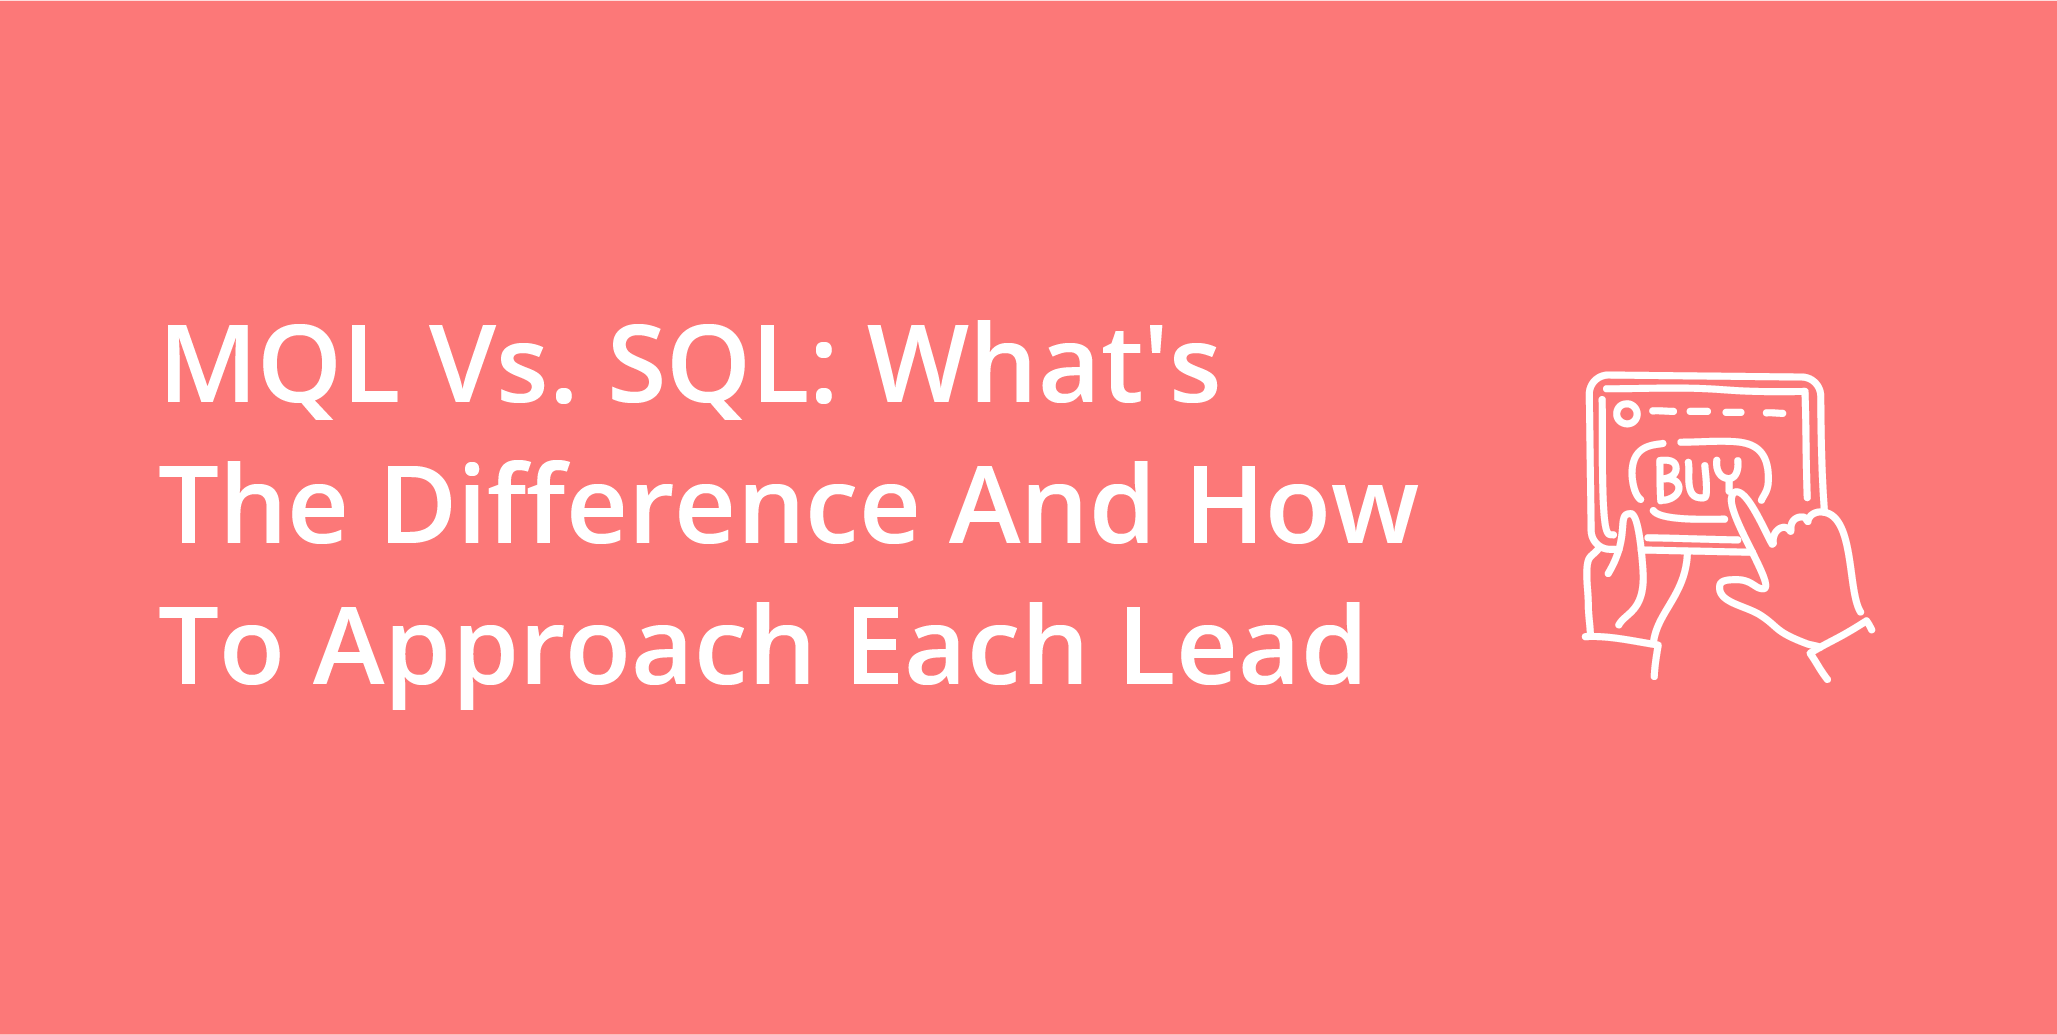 MQL Vs. SQL: What's The Difference And How To Approach Each Lead